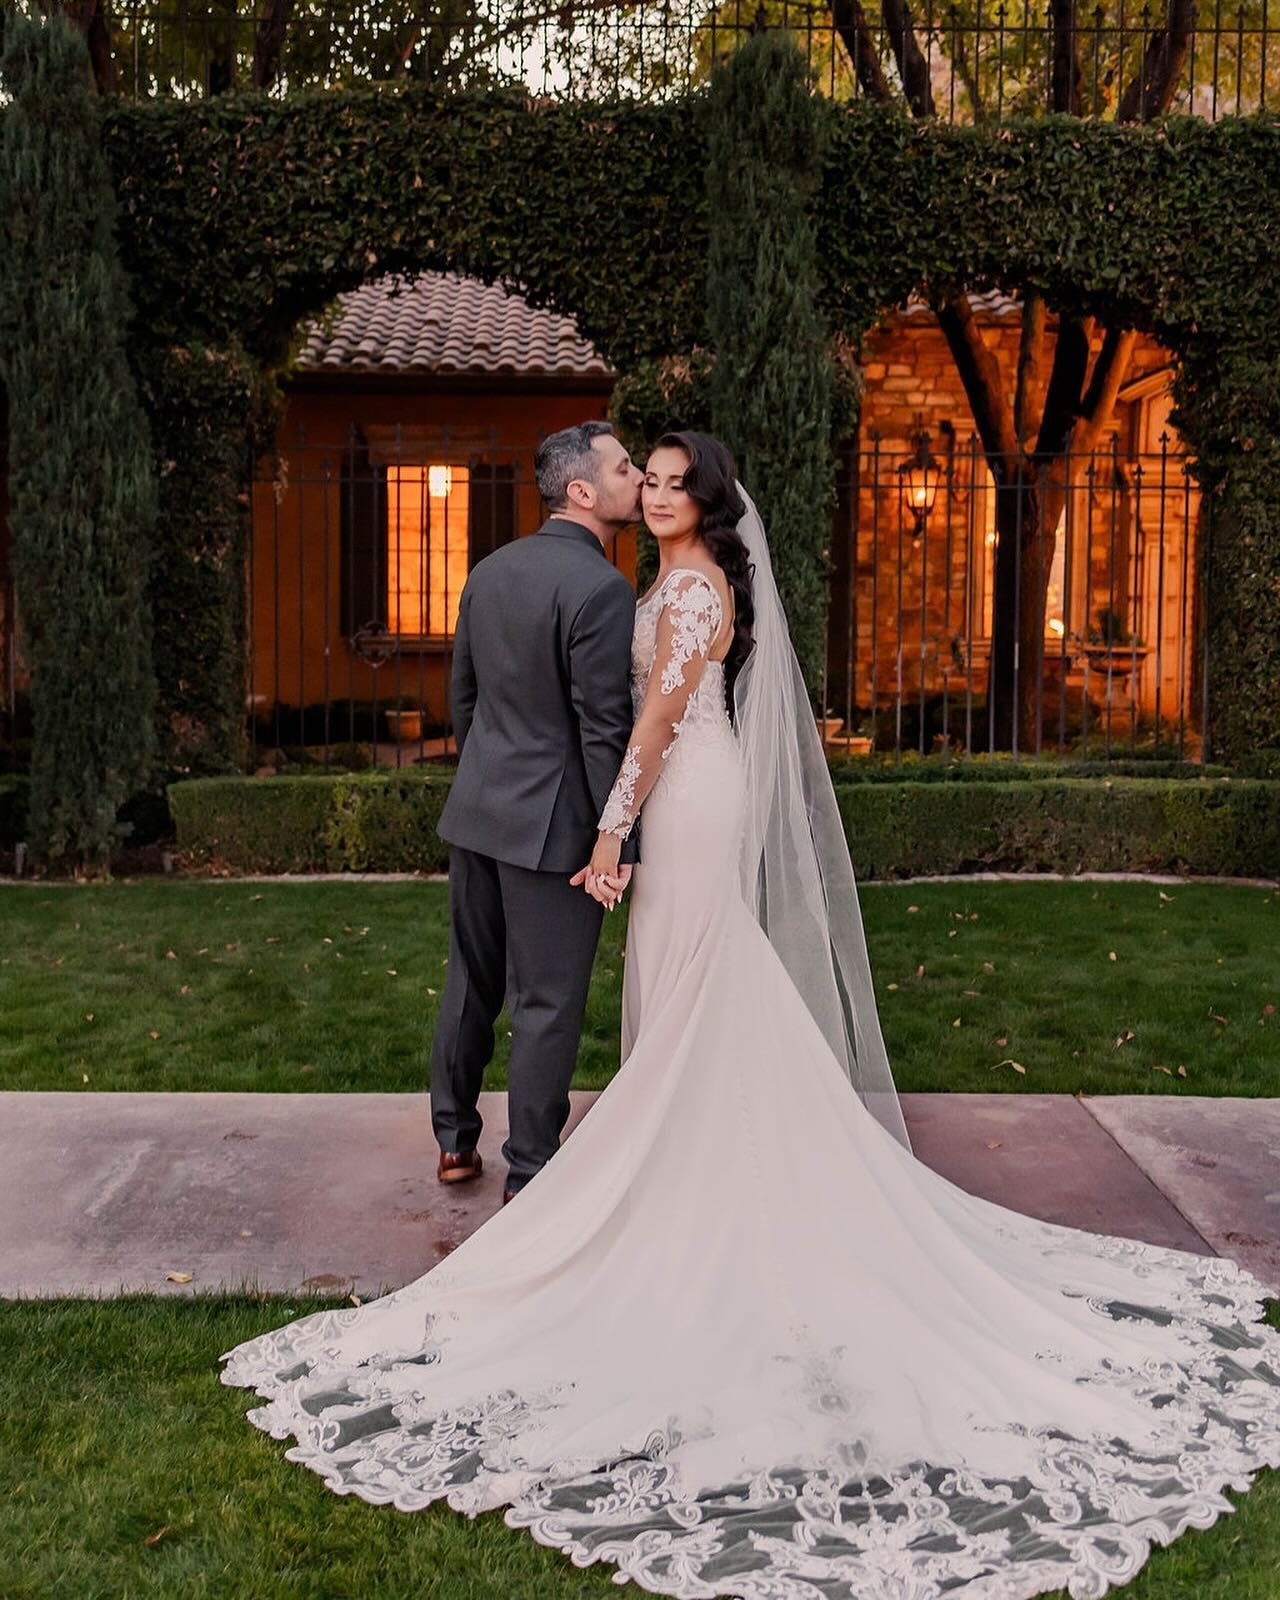 Well, isn&rsquo;t this just the absolute dream? So thankful to have been part of this beautiful couple&rsquo;s day. 🤍
.
Photo: @madisonsatterfieldphotography 
Venue: @villasienaweddings 
Beauty: @vivianmarianibeauty 
Florals: @gardengateflowers 
Vid